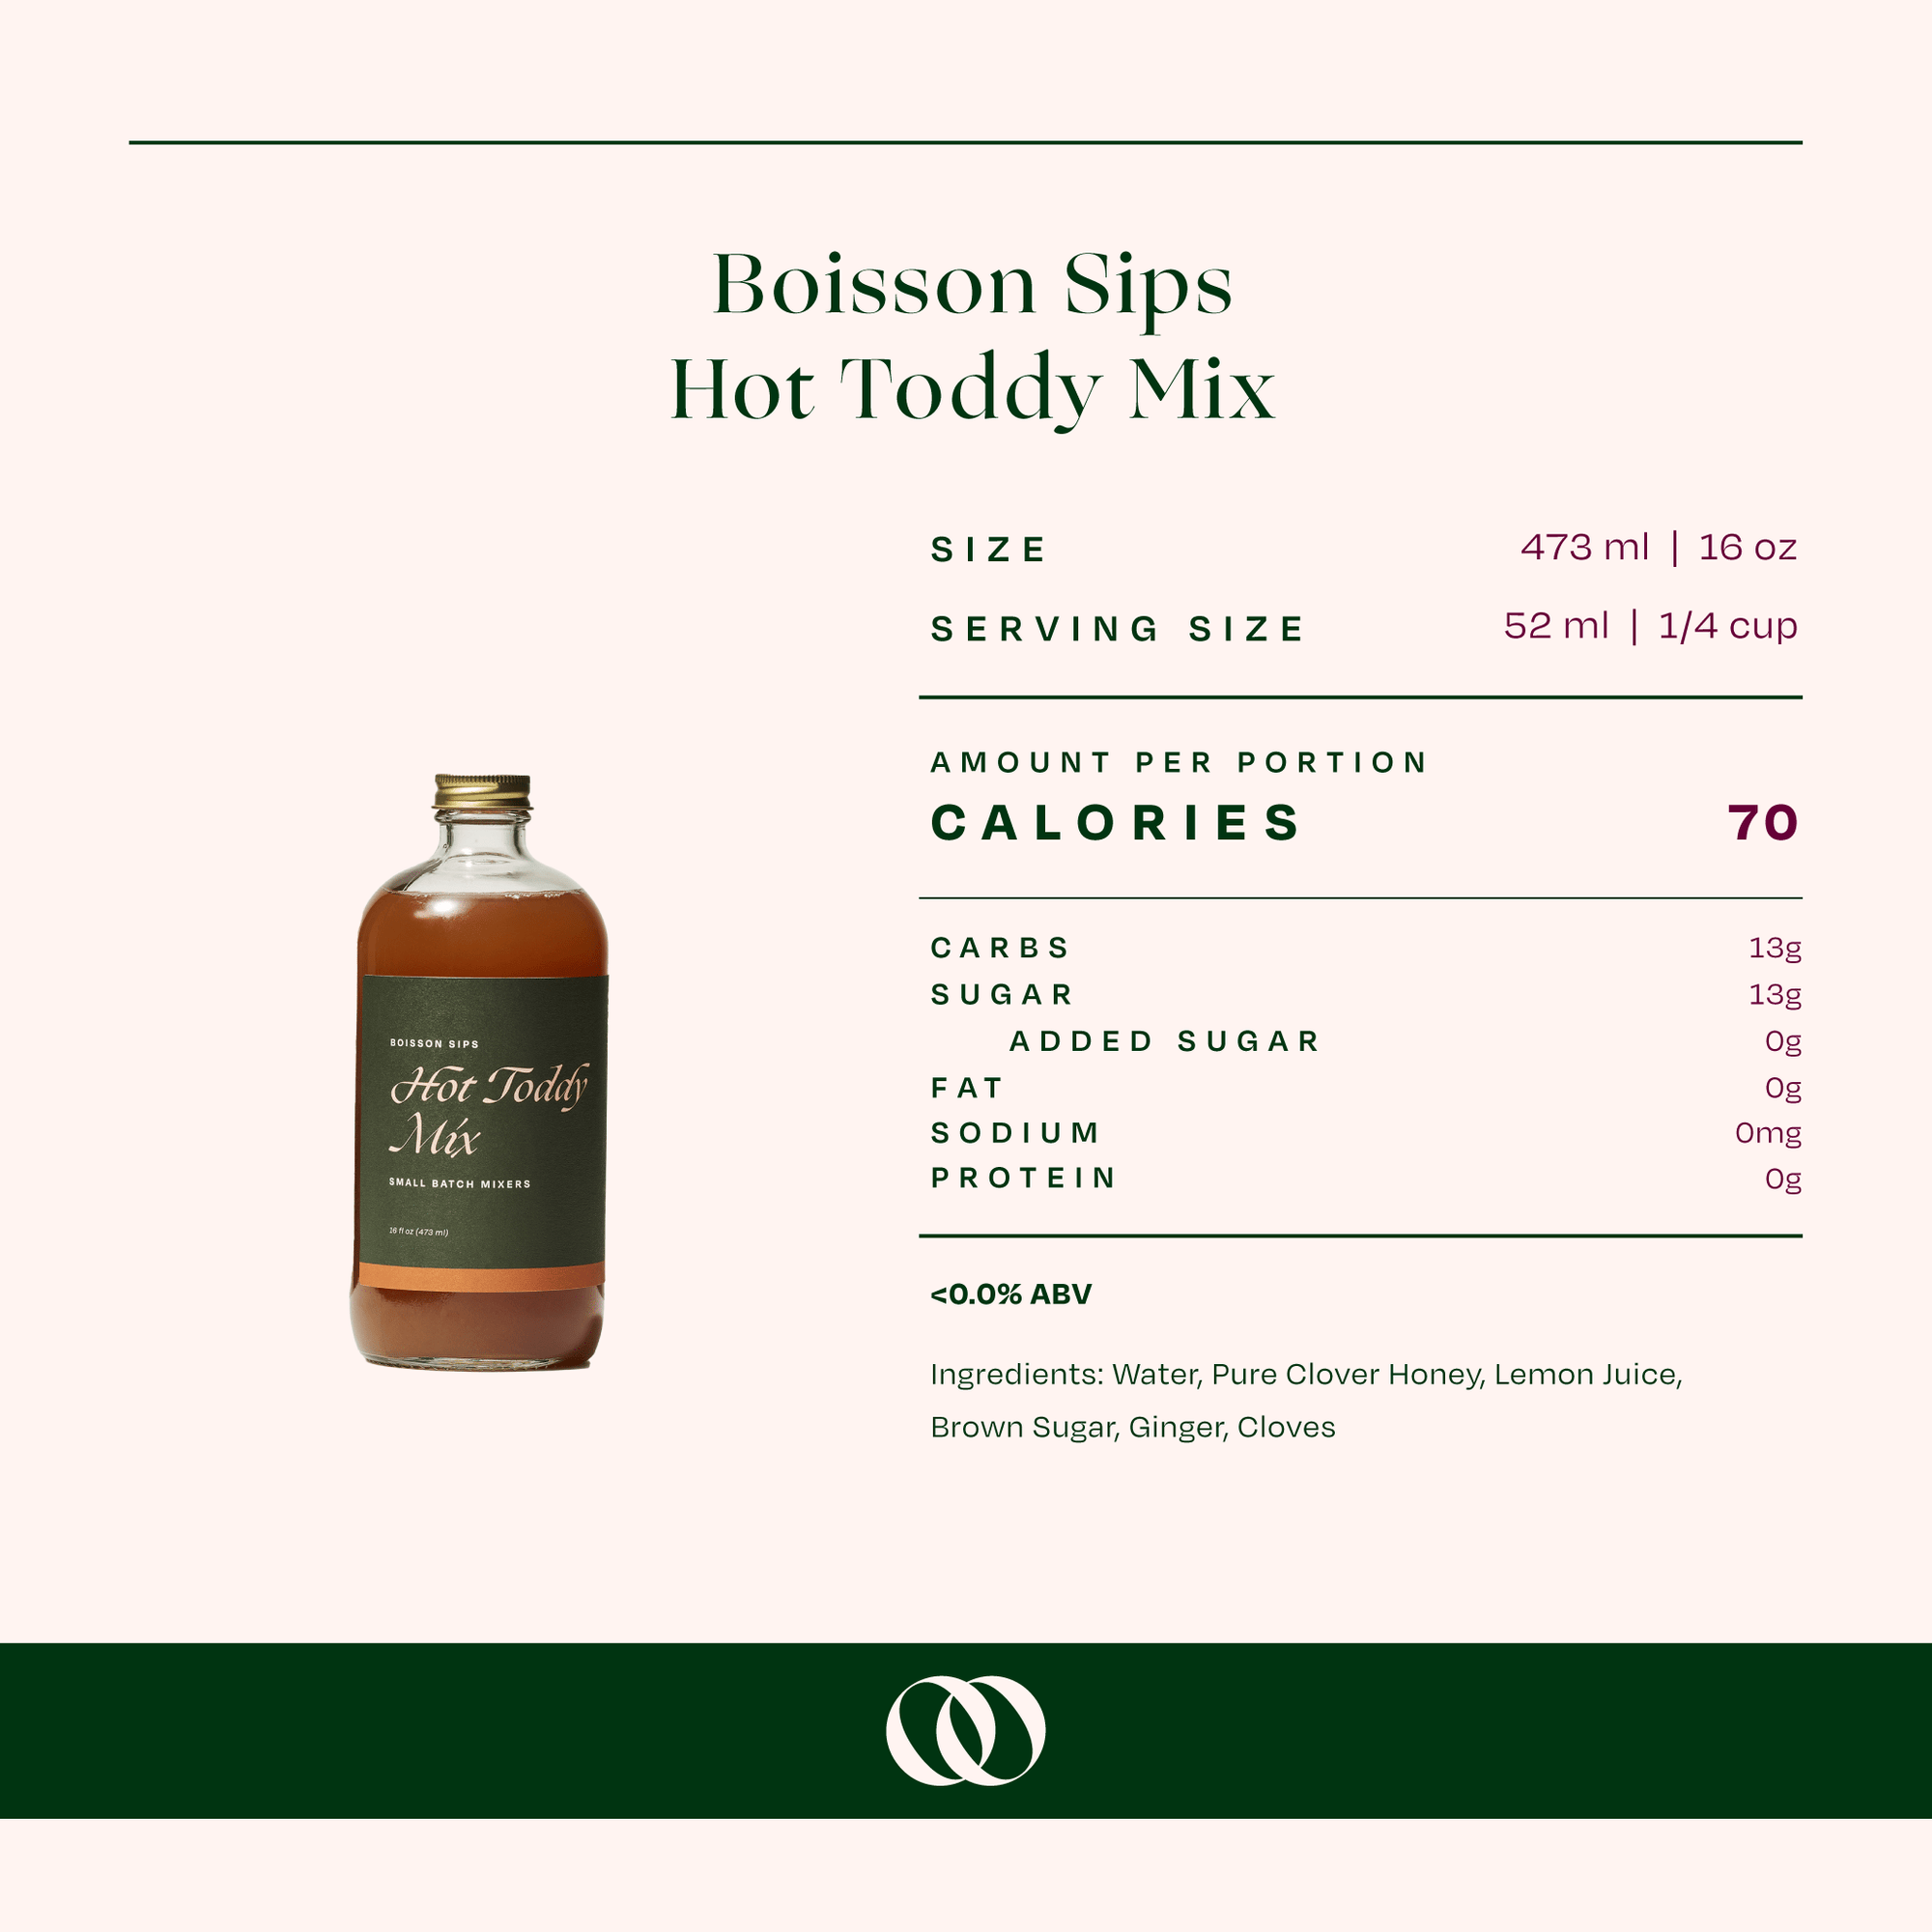 Wood Stove Kitchen - Boisson Sips Hot Toddy Mix Small Batch Mixers - Boisson